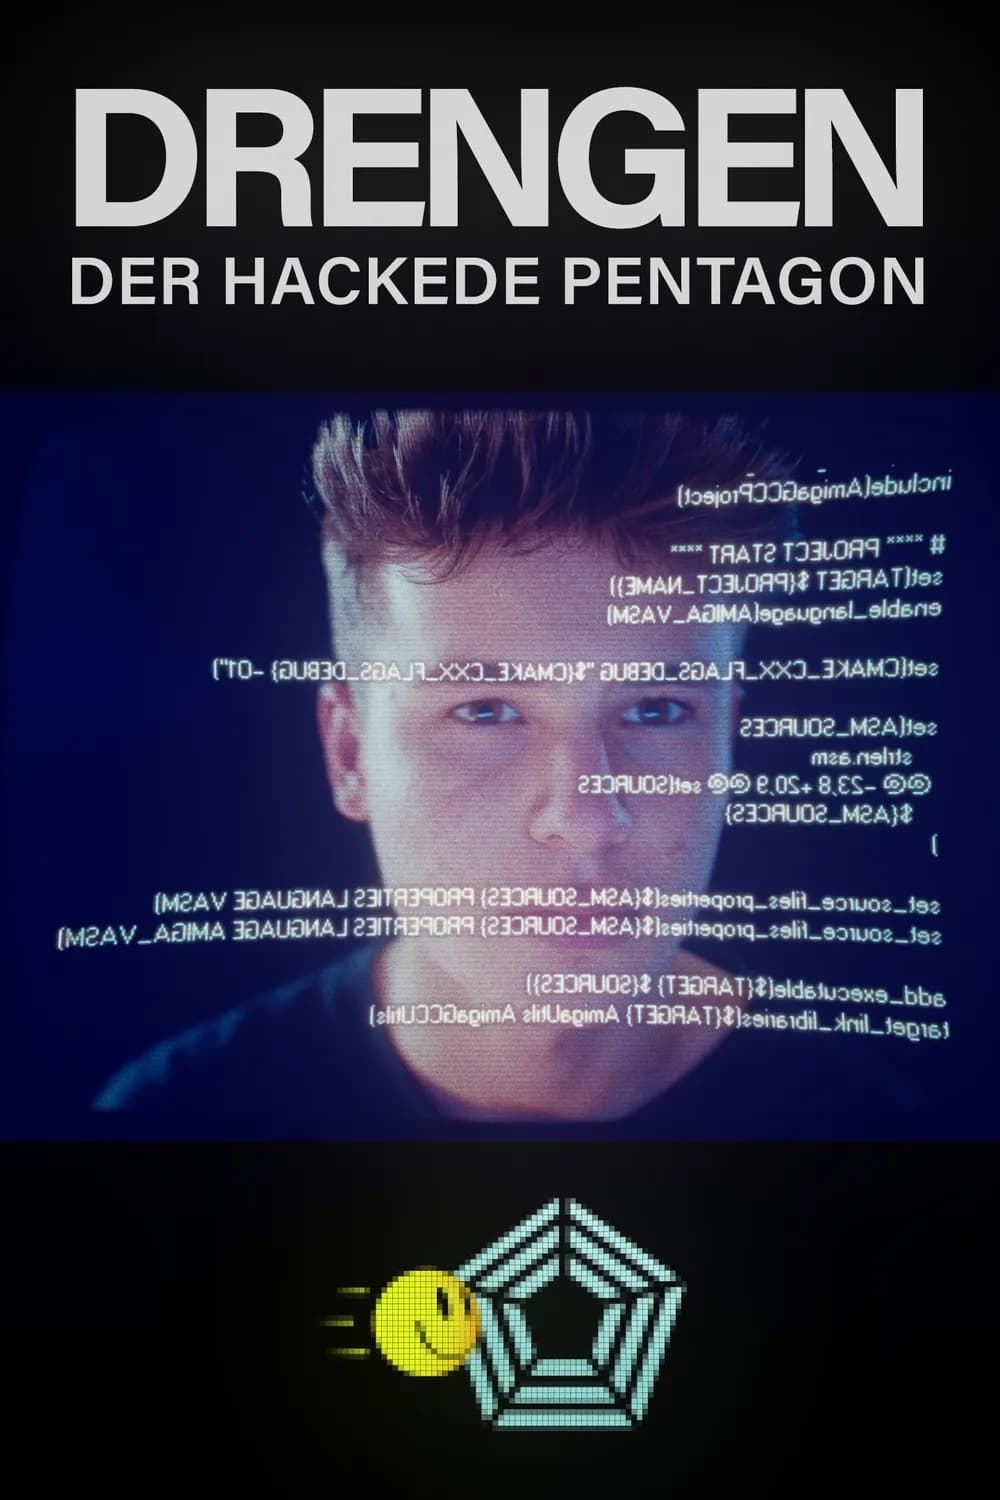 The Boy who Hacked The Pentagon